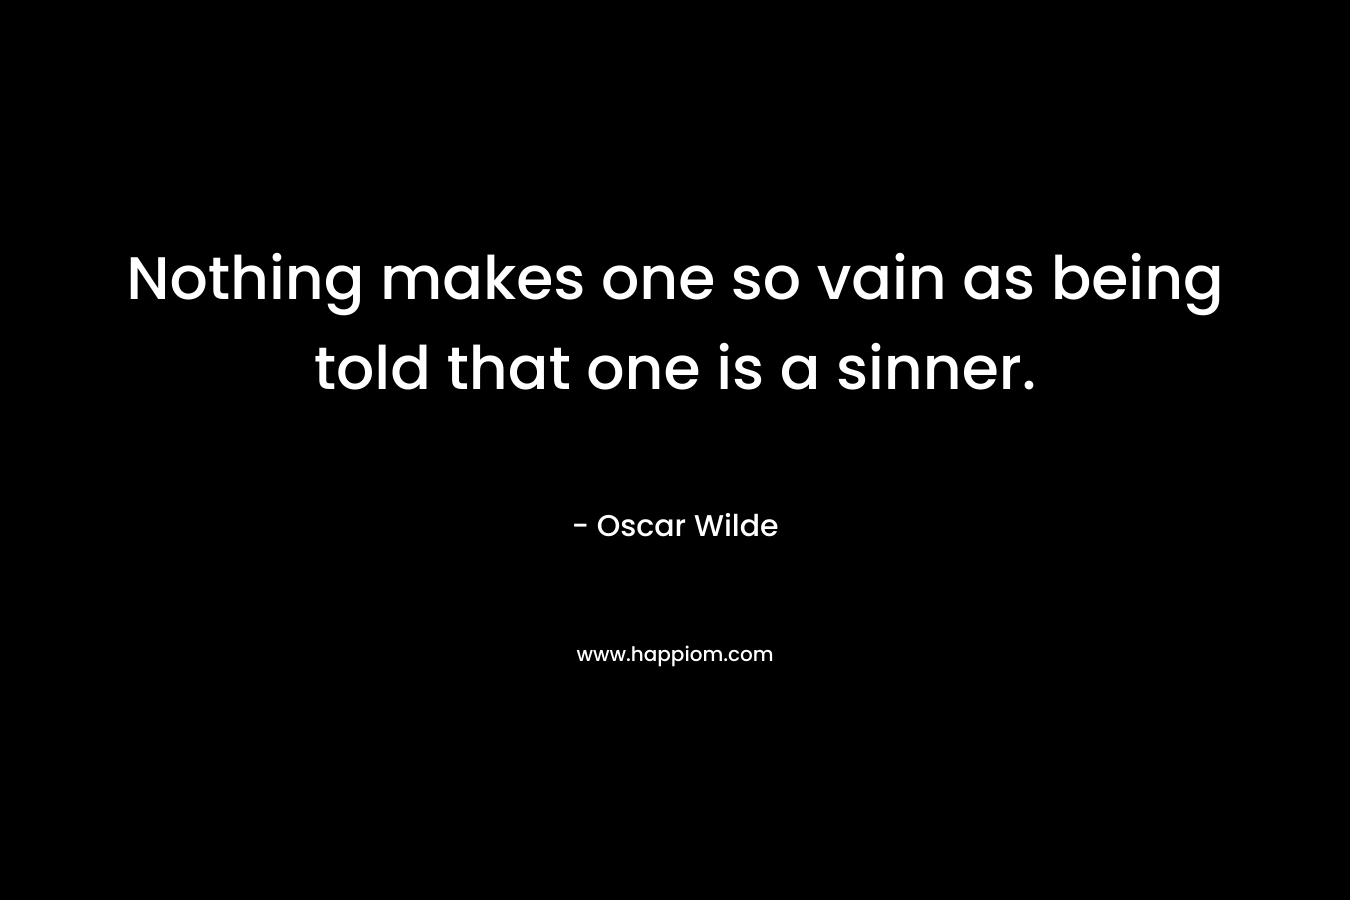 Nothing makes one so vain as being told that one is a sinner. – Oscar Wilde